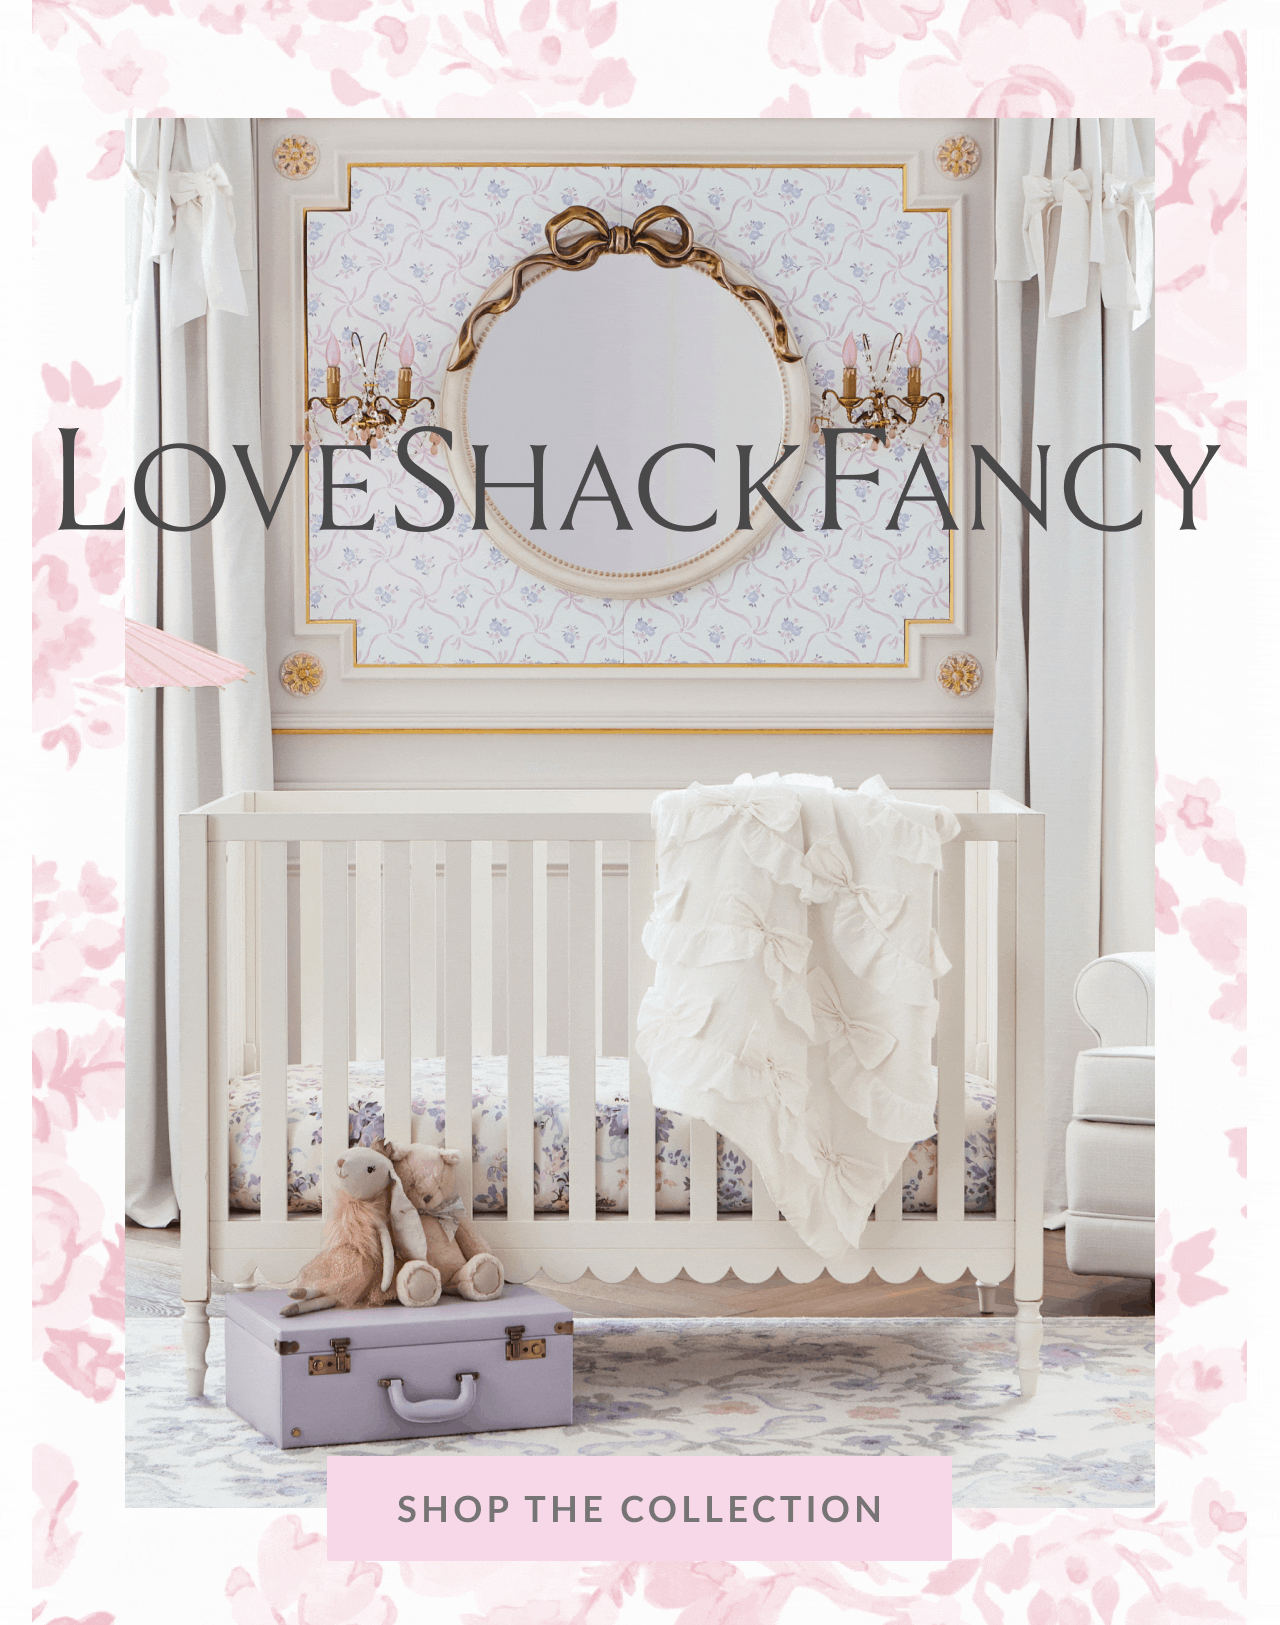 LOVESHACKFANCY - SHOP THE COLLECTION